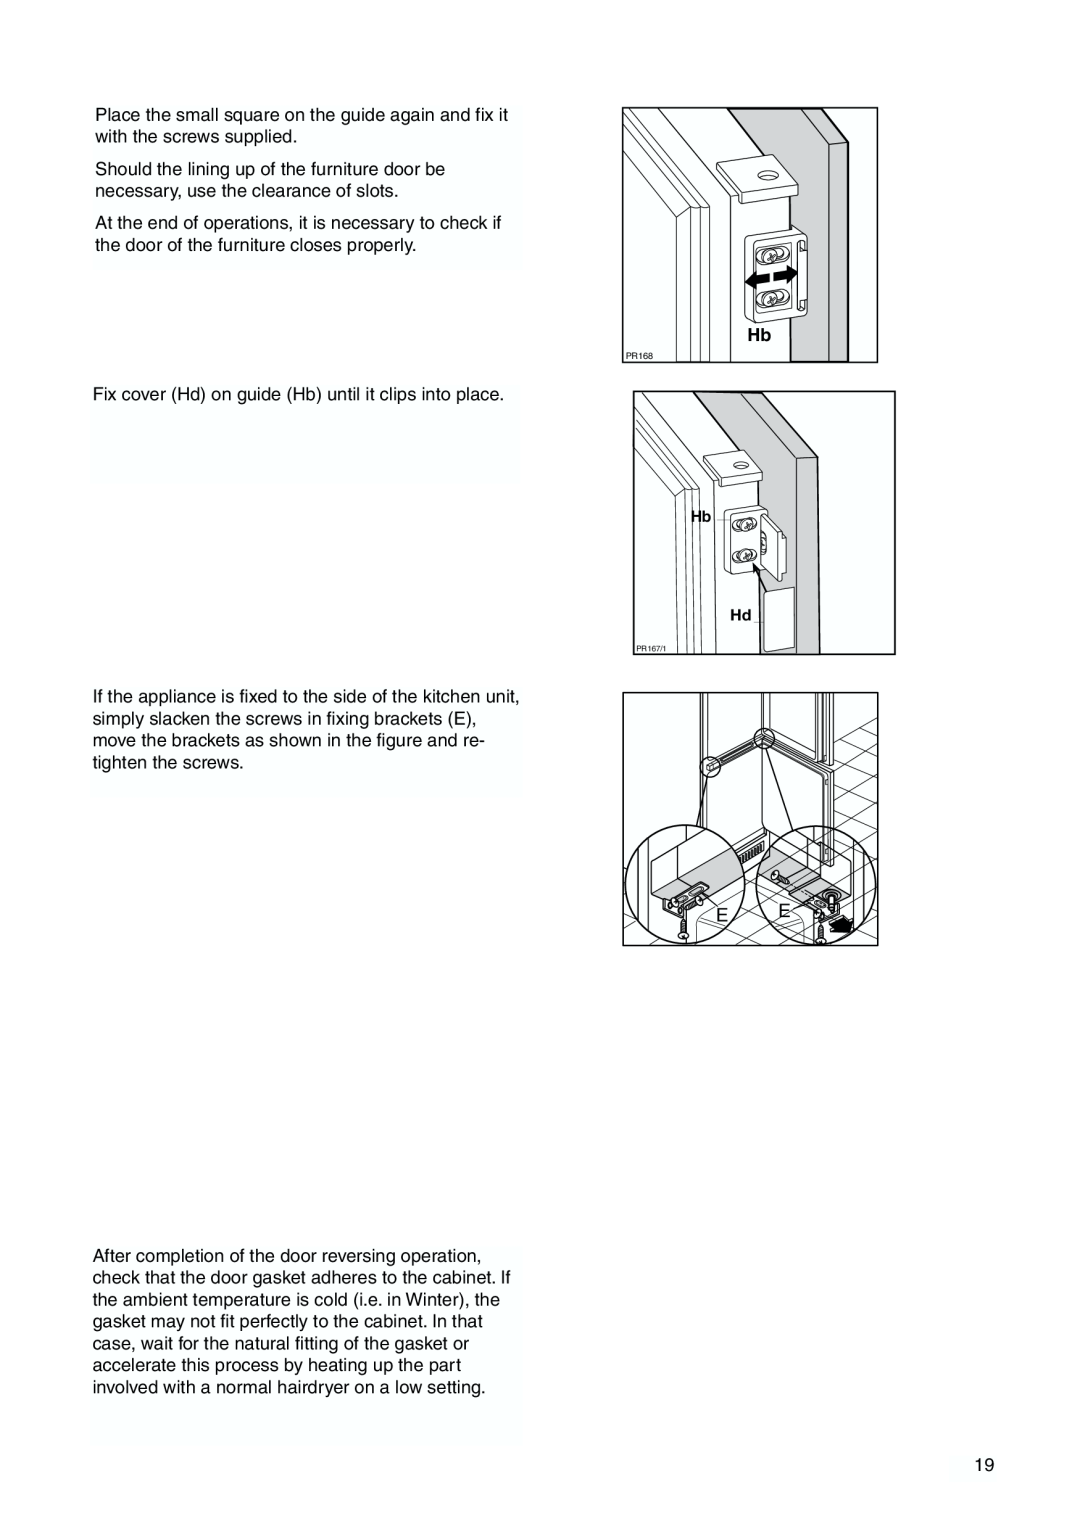 Zanussi ZBB6286 manual Fix cover Hd on guide Hb until it clips into place 